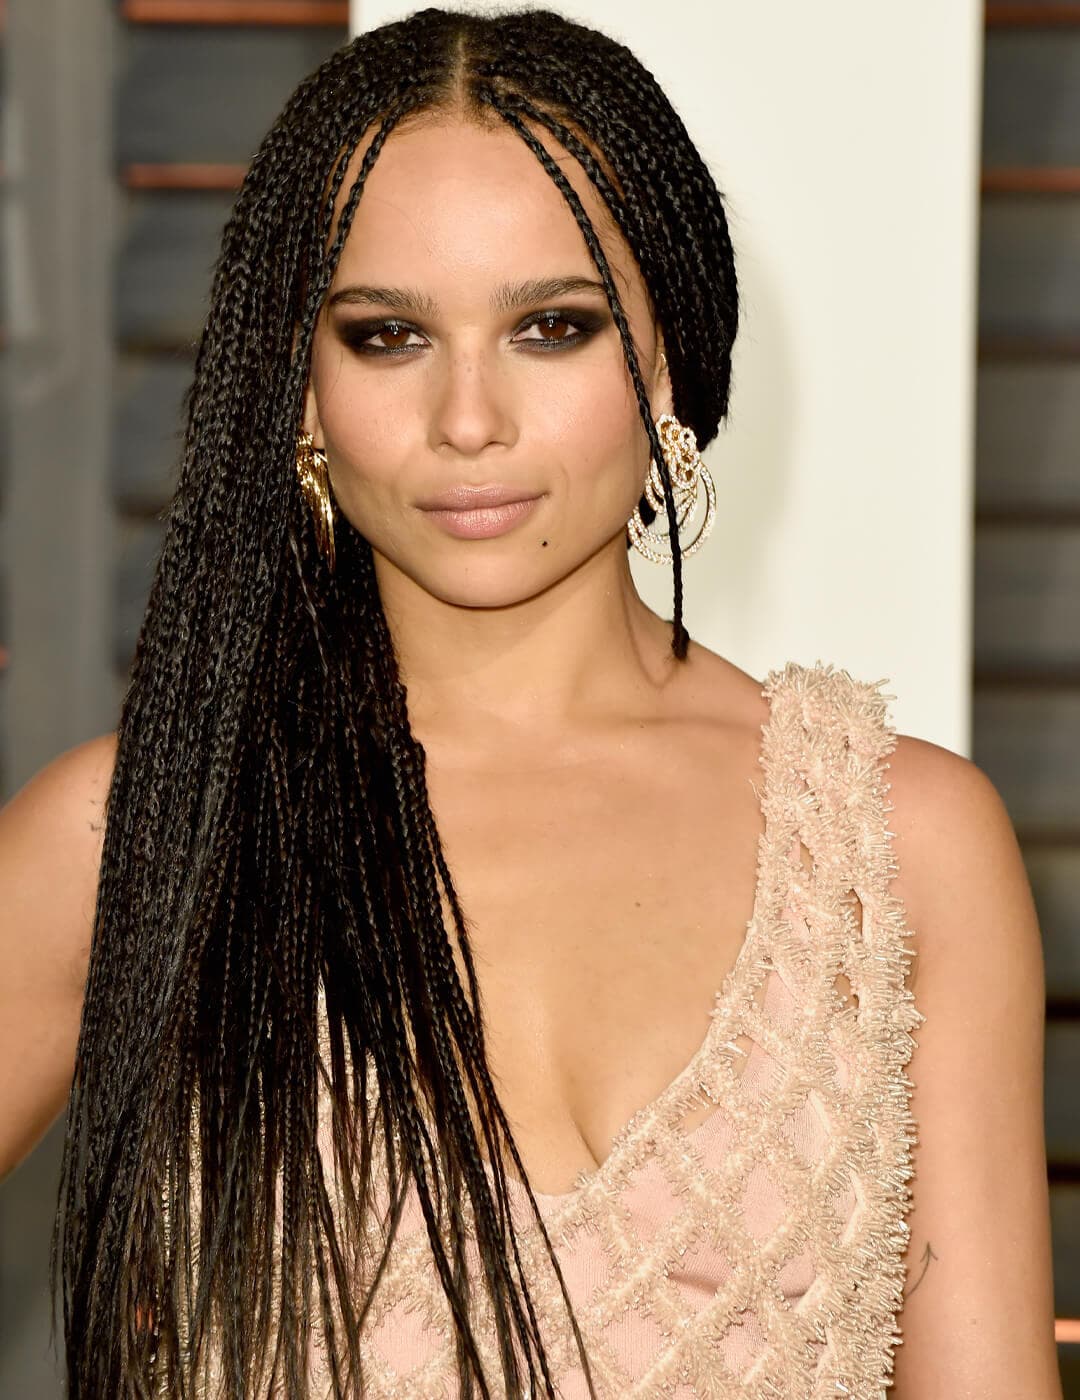 Zoe Kravitz in a nude pink, fringed dress rocking her micro braided hairstyle